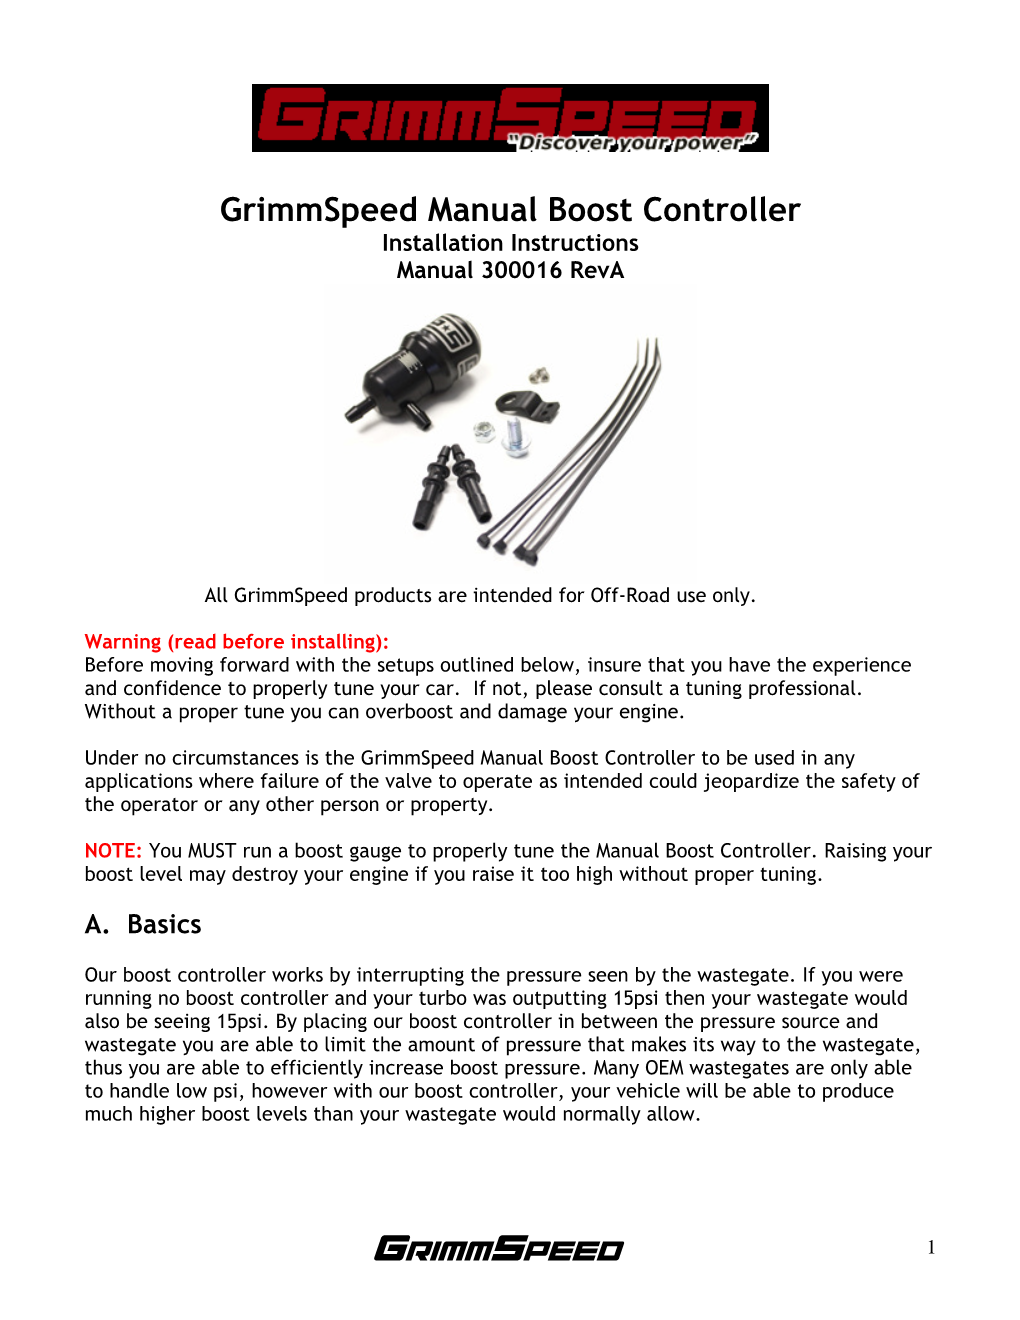 Manual Boost Controller Install Instructions